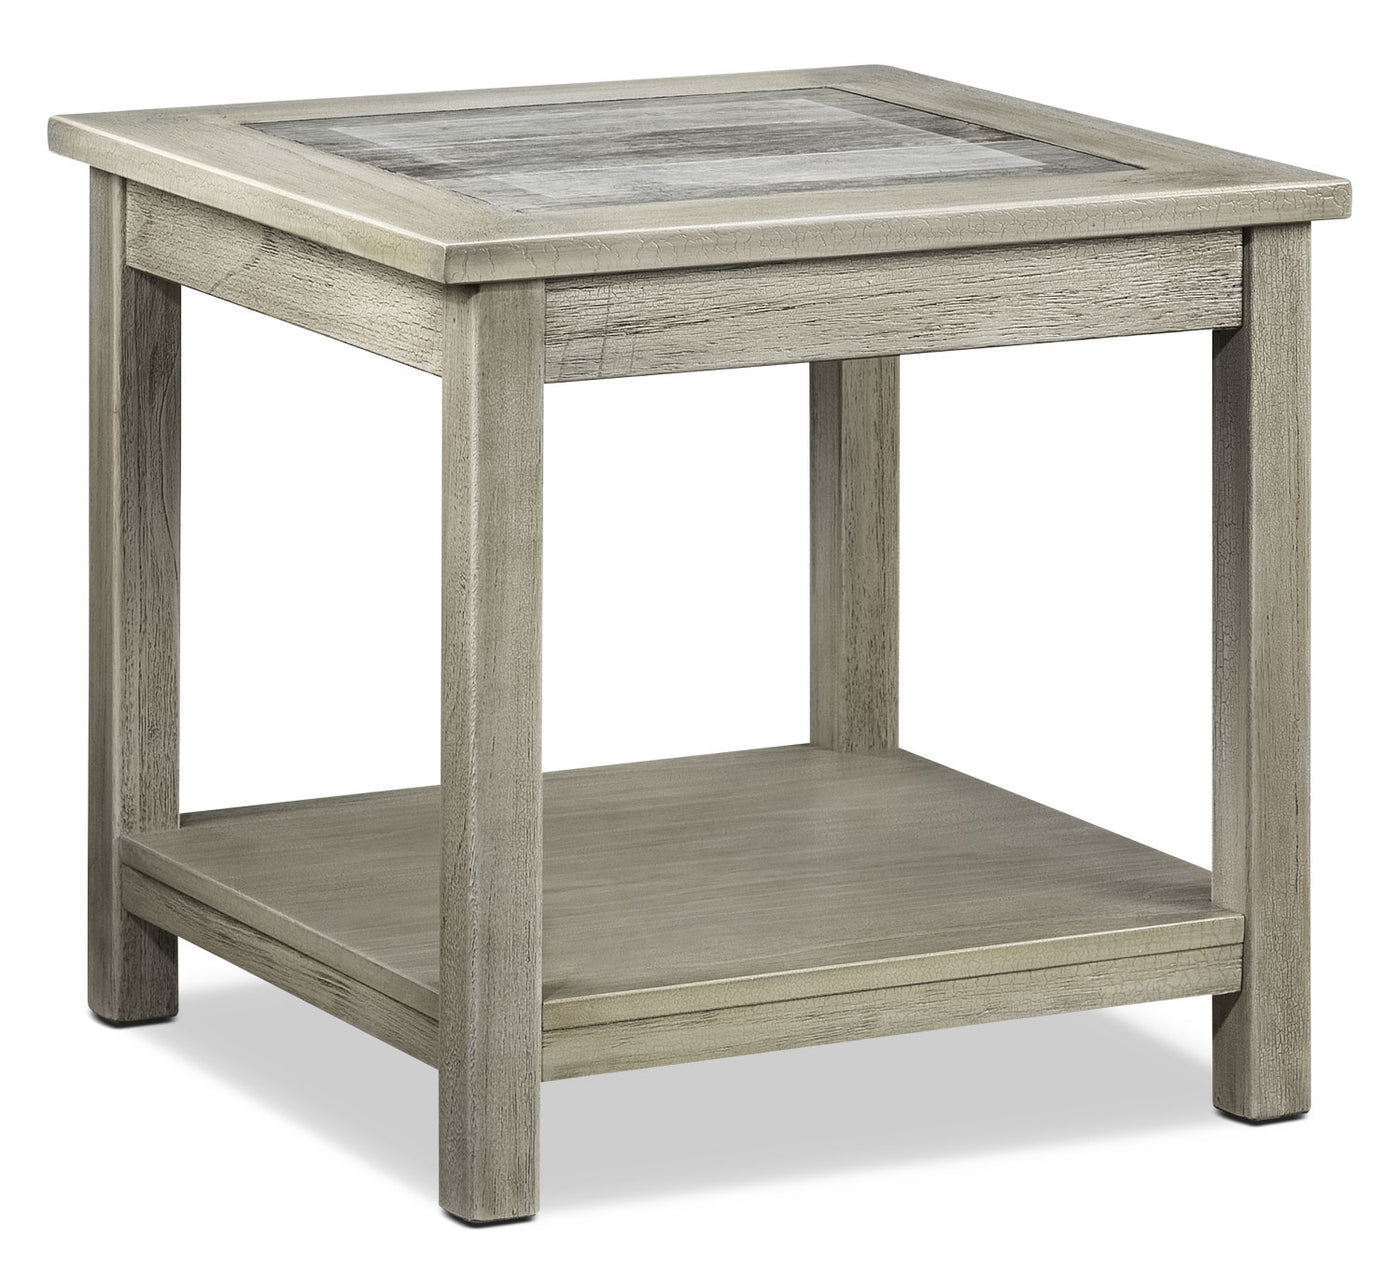 Thomas End Table - Natural Beige